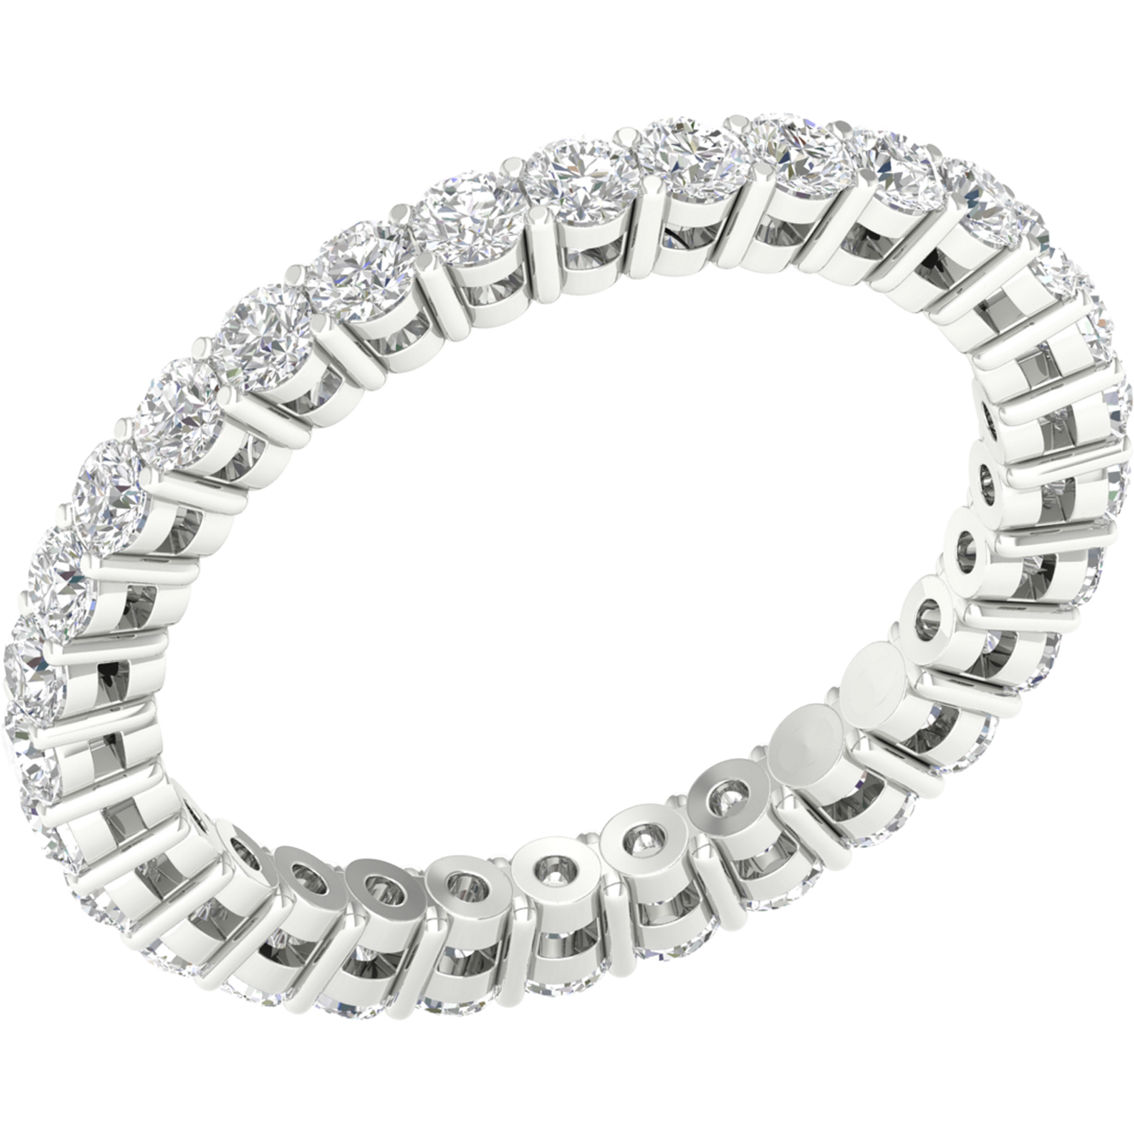 Pure Brilliance 14K White Gold 1 CTW Eternity Band with IGI Certification Size 7 - Image 2 of 2